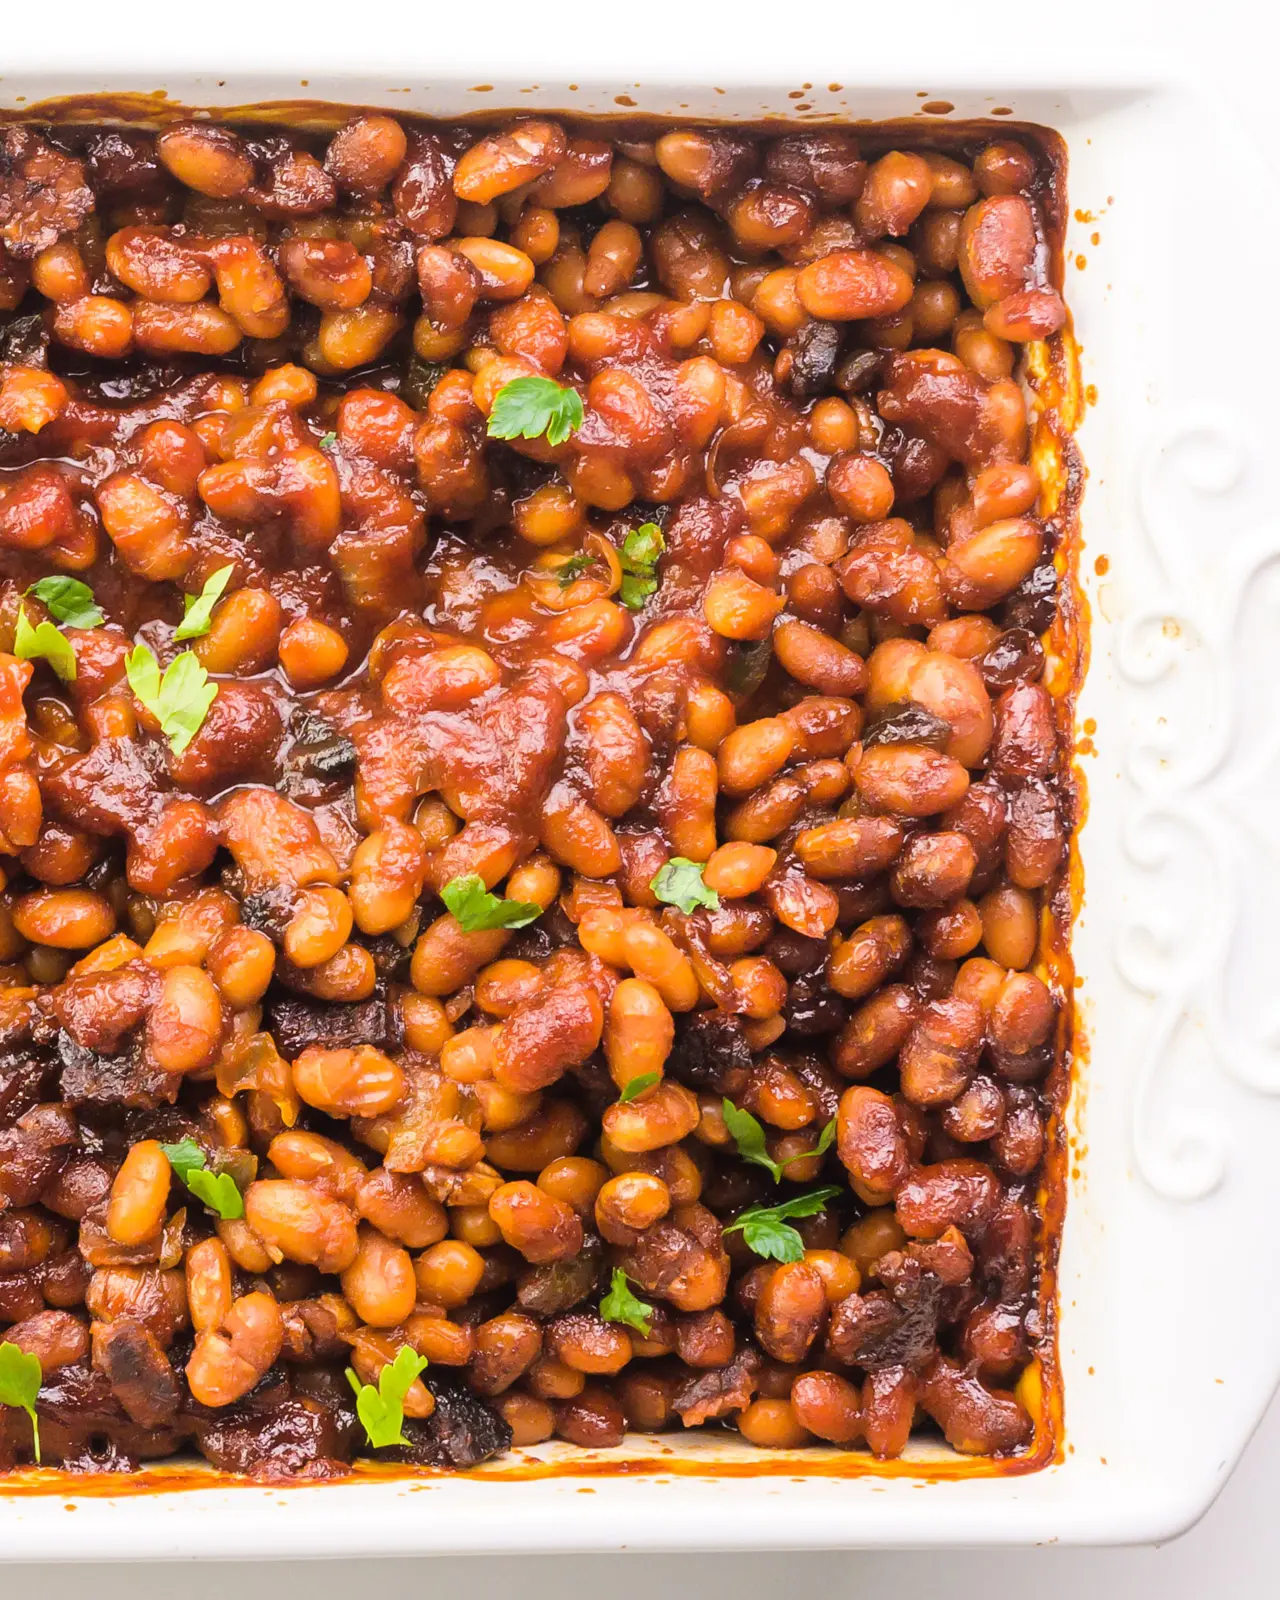 Looking down into a white baking dish full of baked beans with fresh chopped parsley on top.